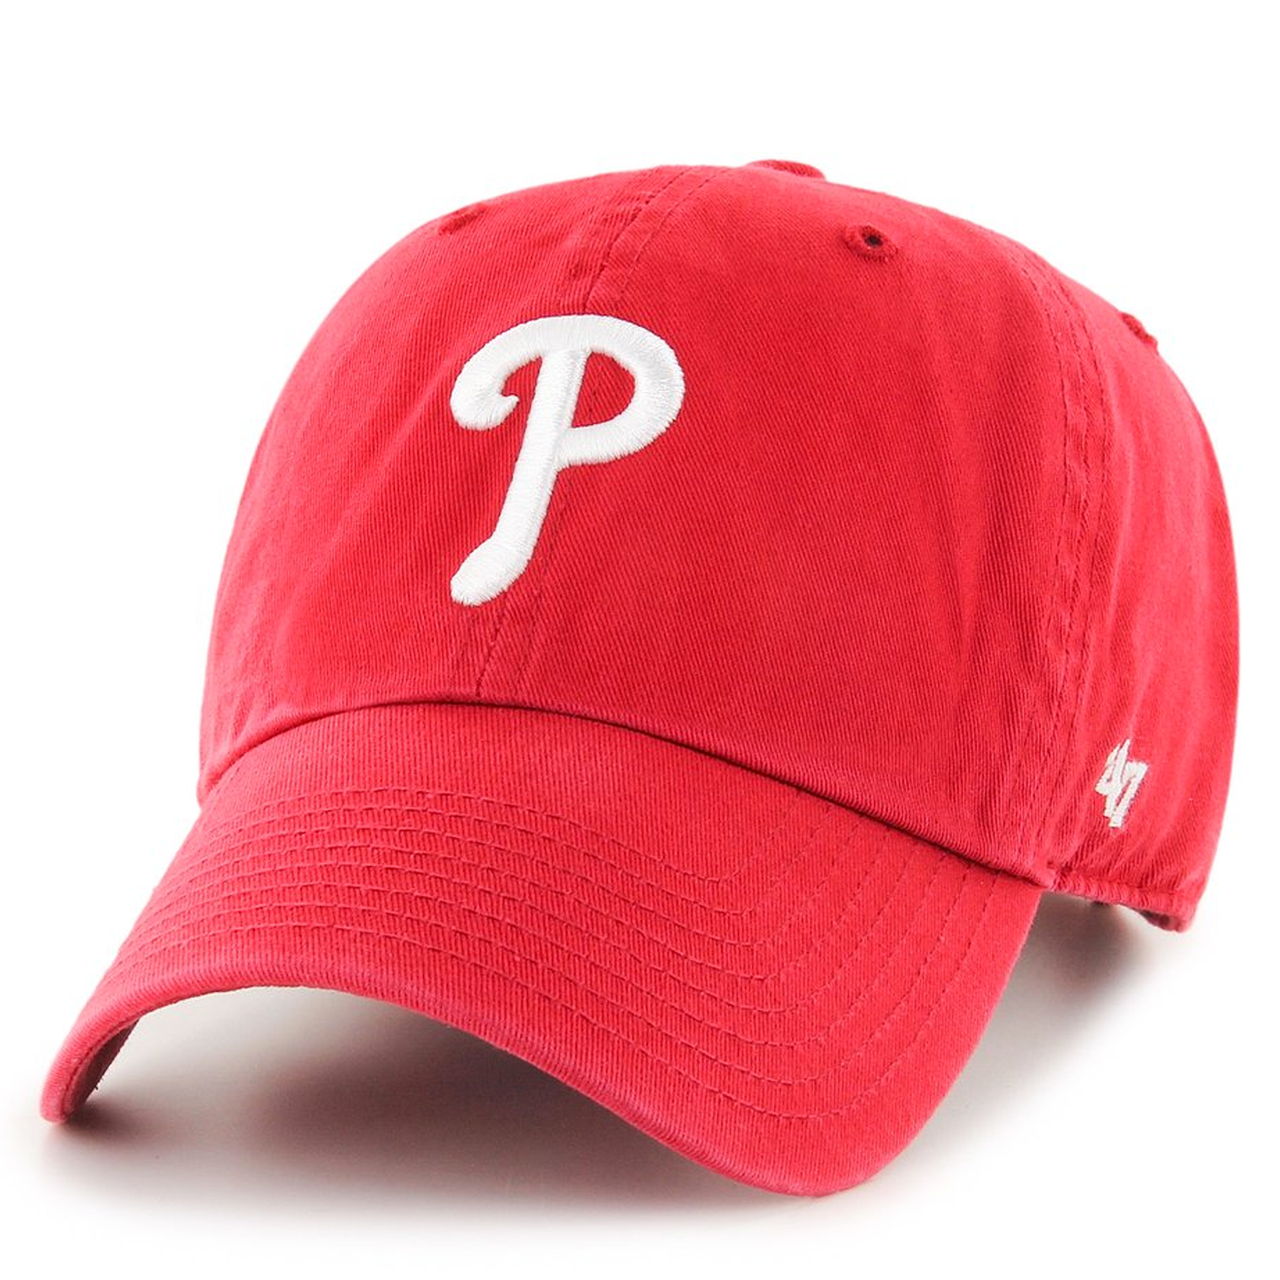 on the front of the women's philadelphia phillies red dad hat is the philadelphia phillies logo embroidered in white